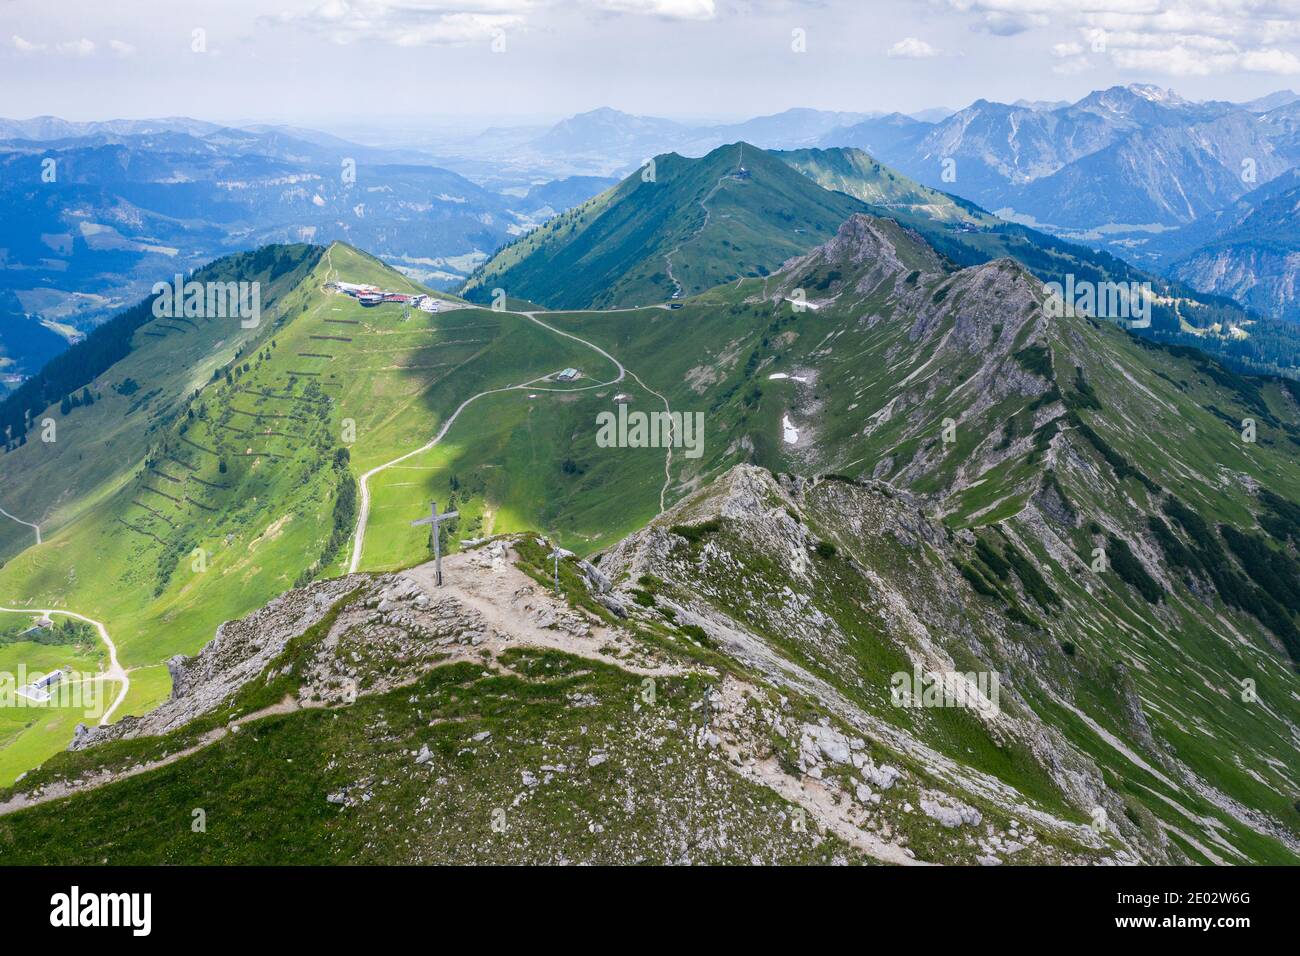 Walser Hammerspitze with a view of the Kanzelwand Mountain Station and Fellhorn in the Background, Bavaria, Germany Stock Photo